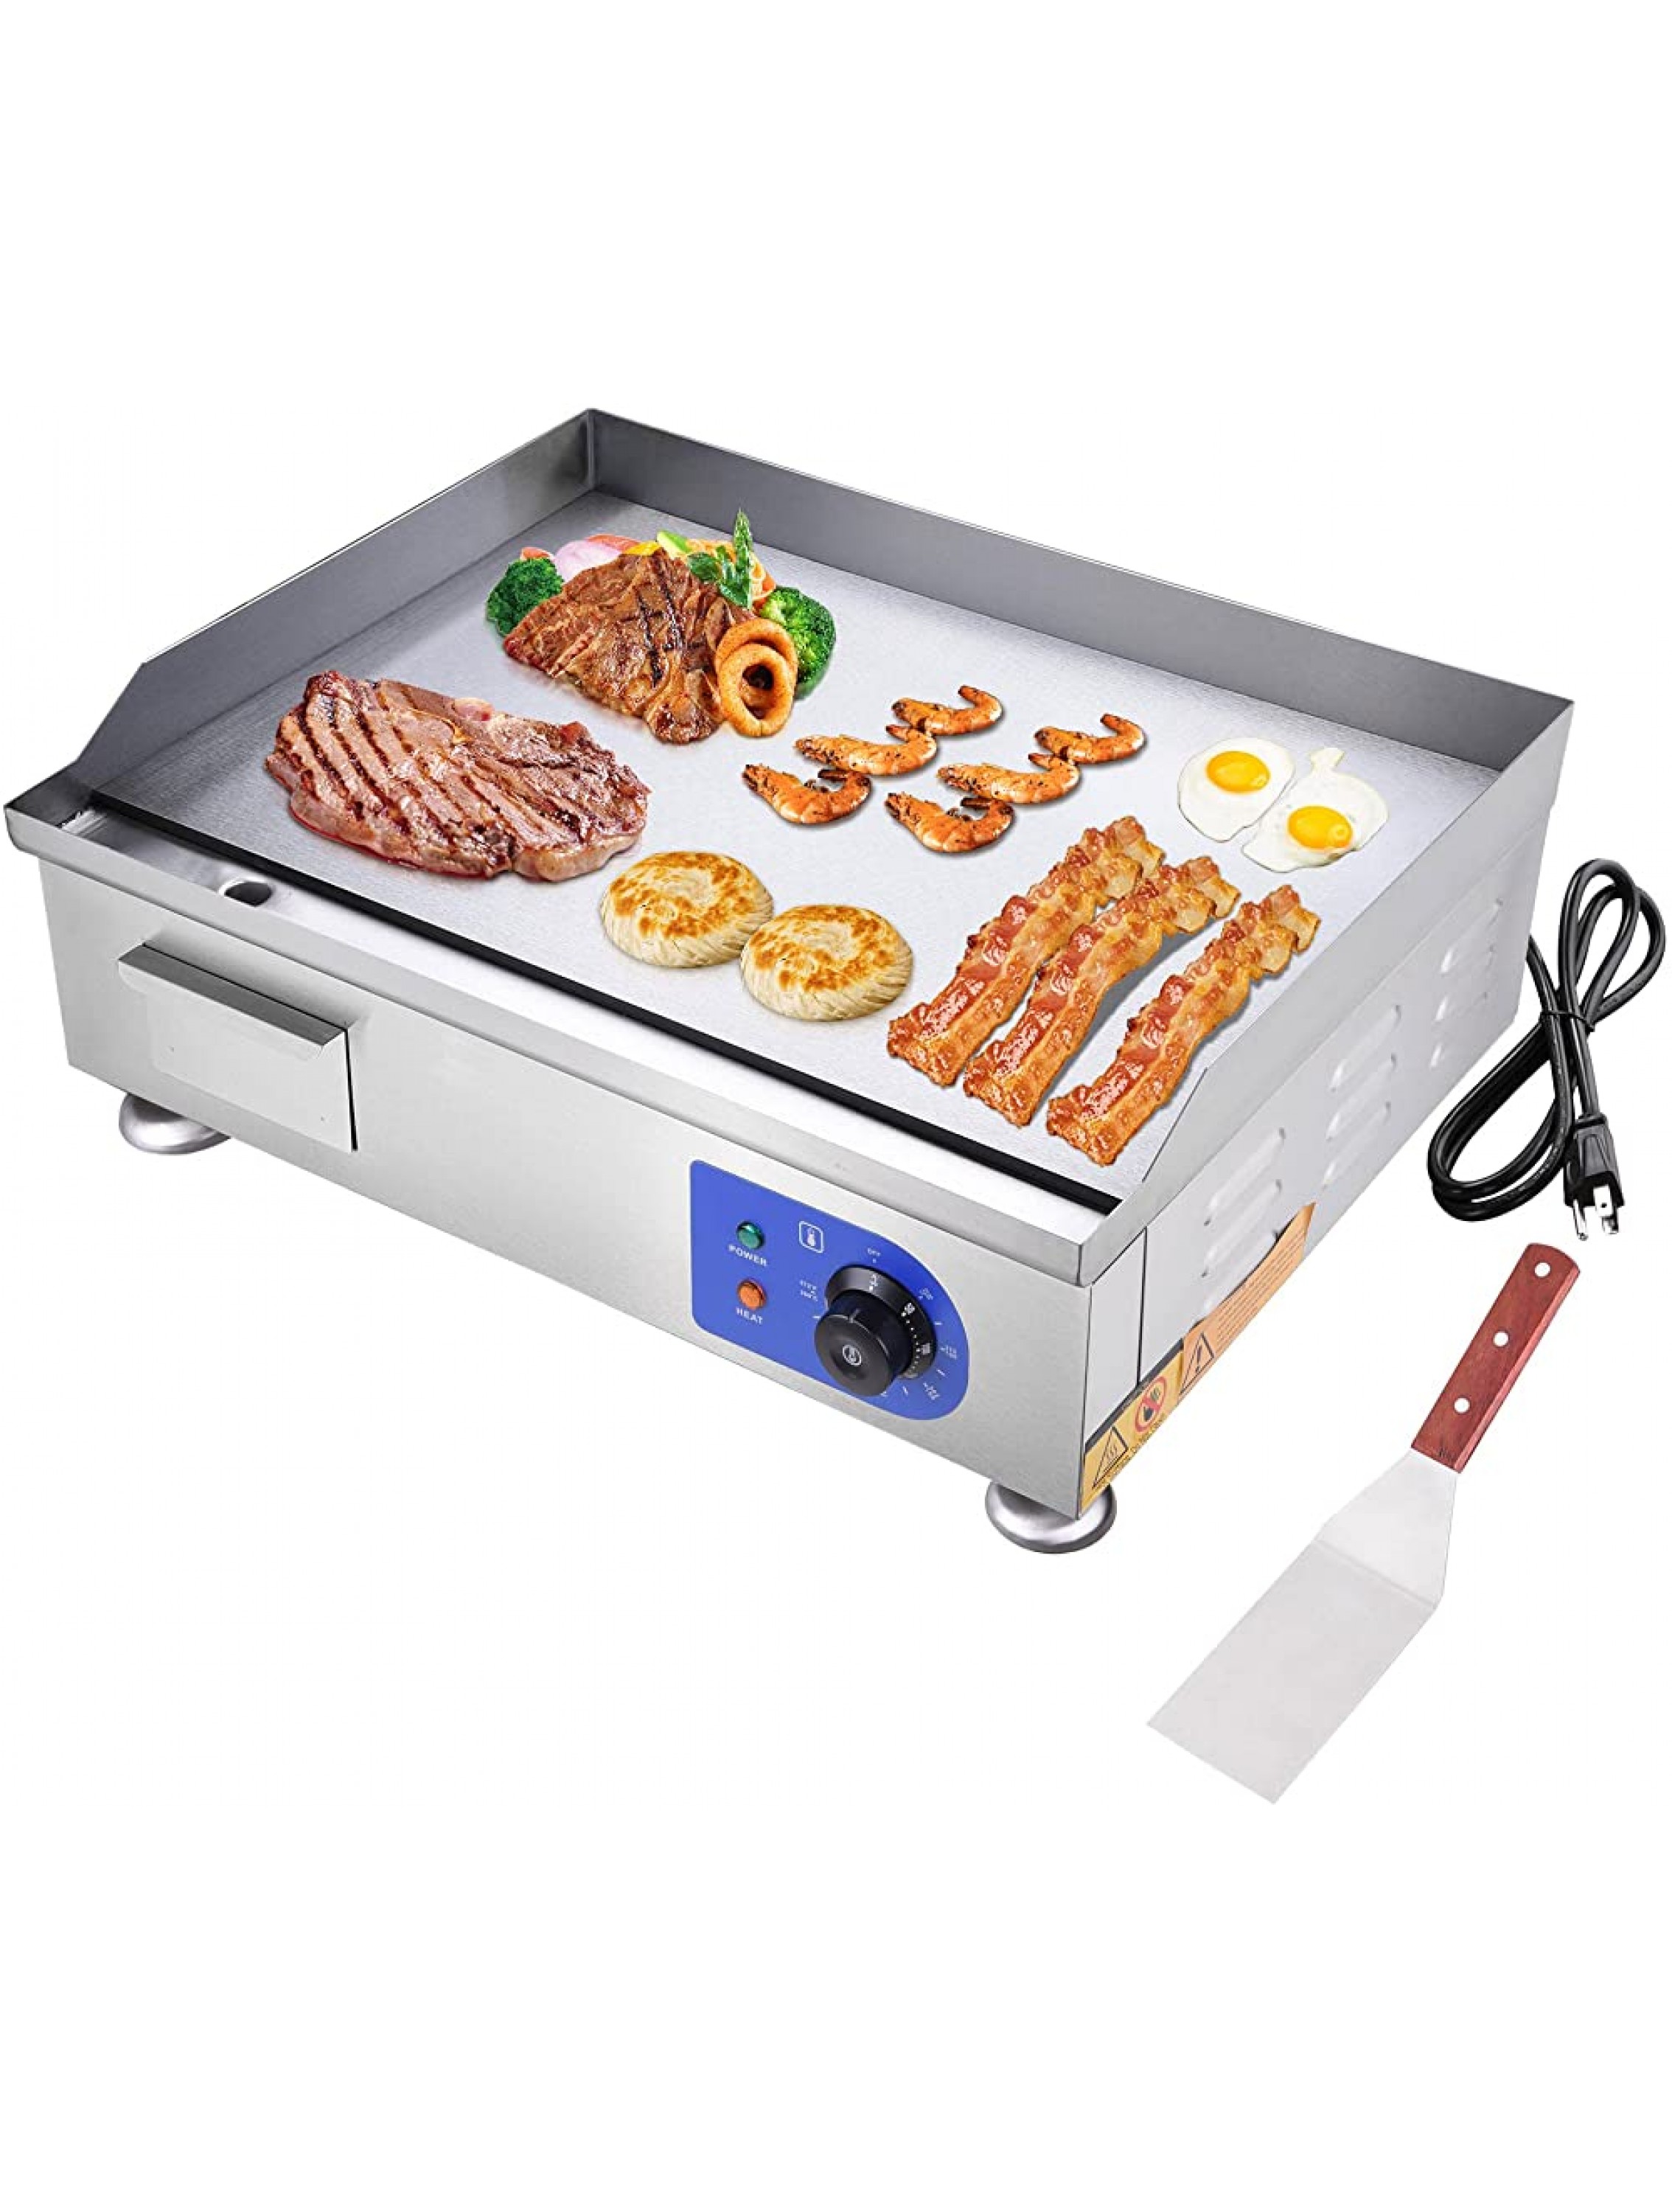 WeChef 24 2500W Electric Countertop Griddle Stainless Steel Adjustable Temp Control Commercial Restaurant Grill - B4W9A1UC4